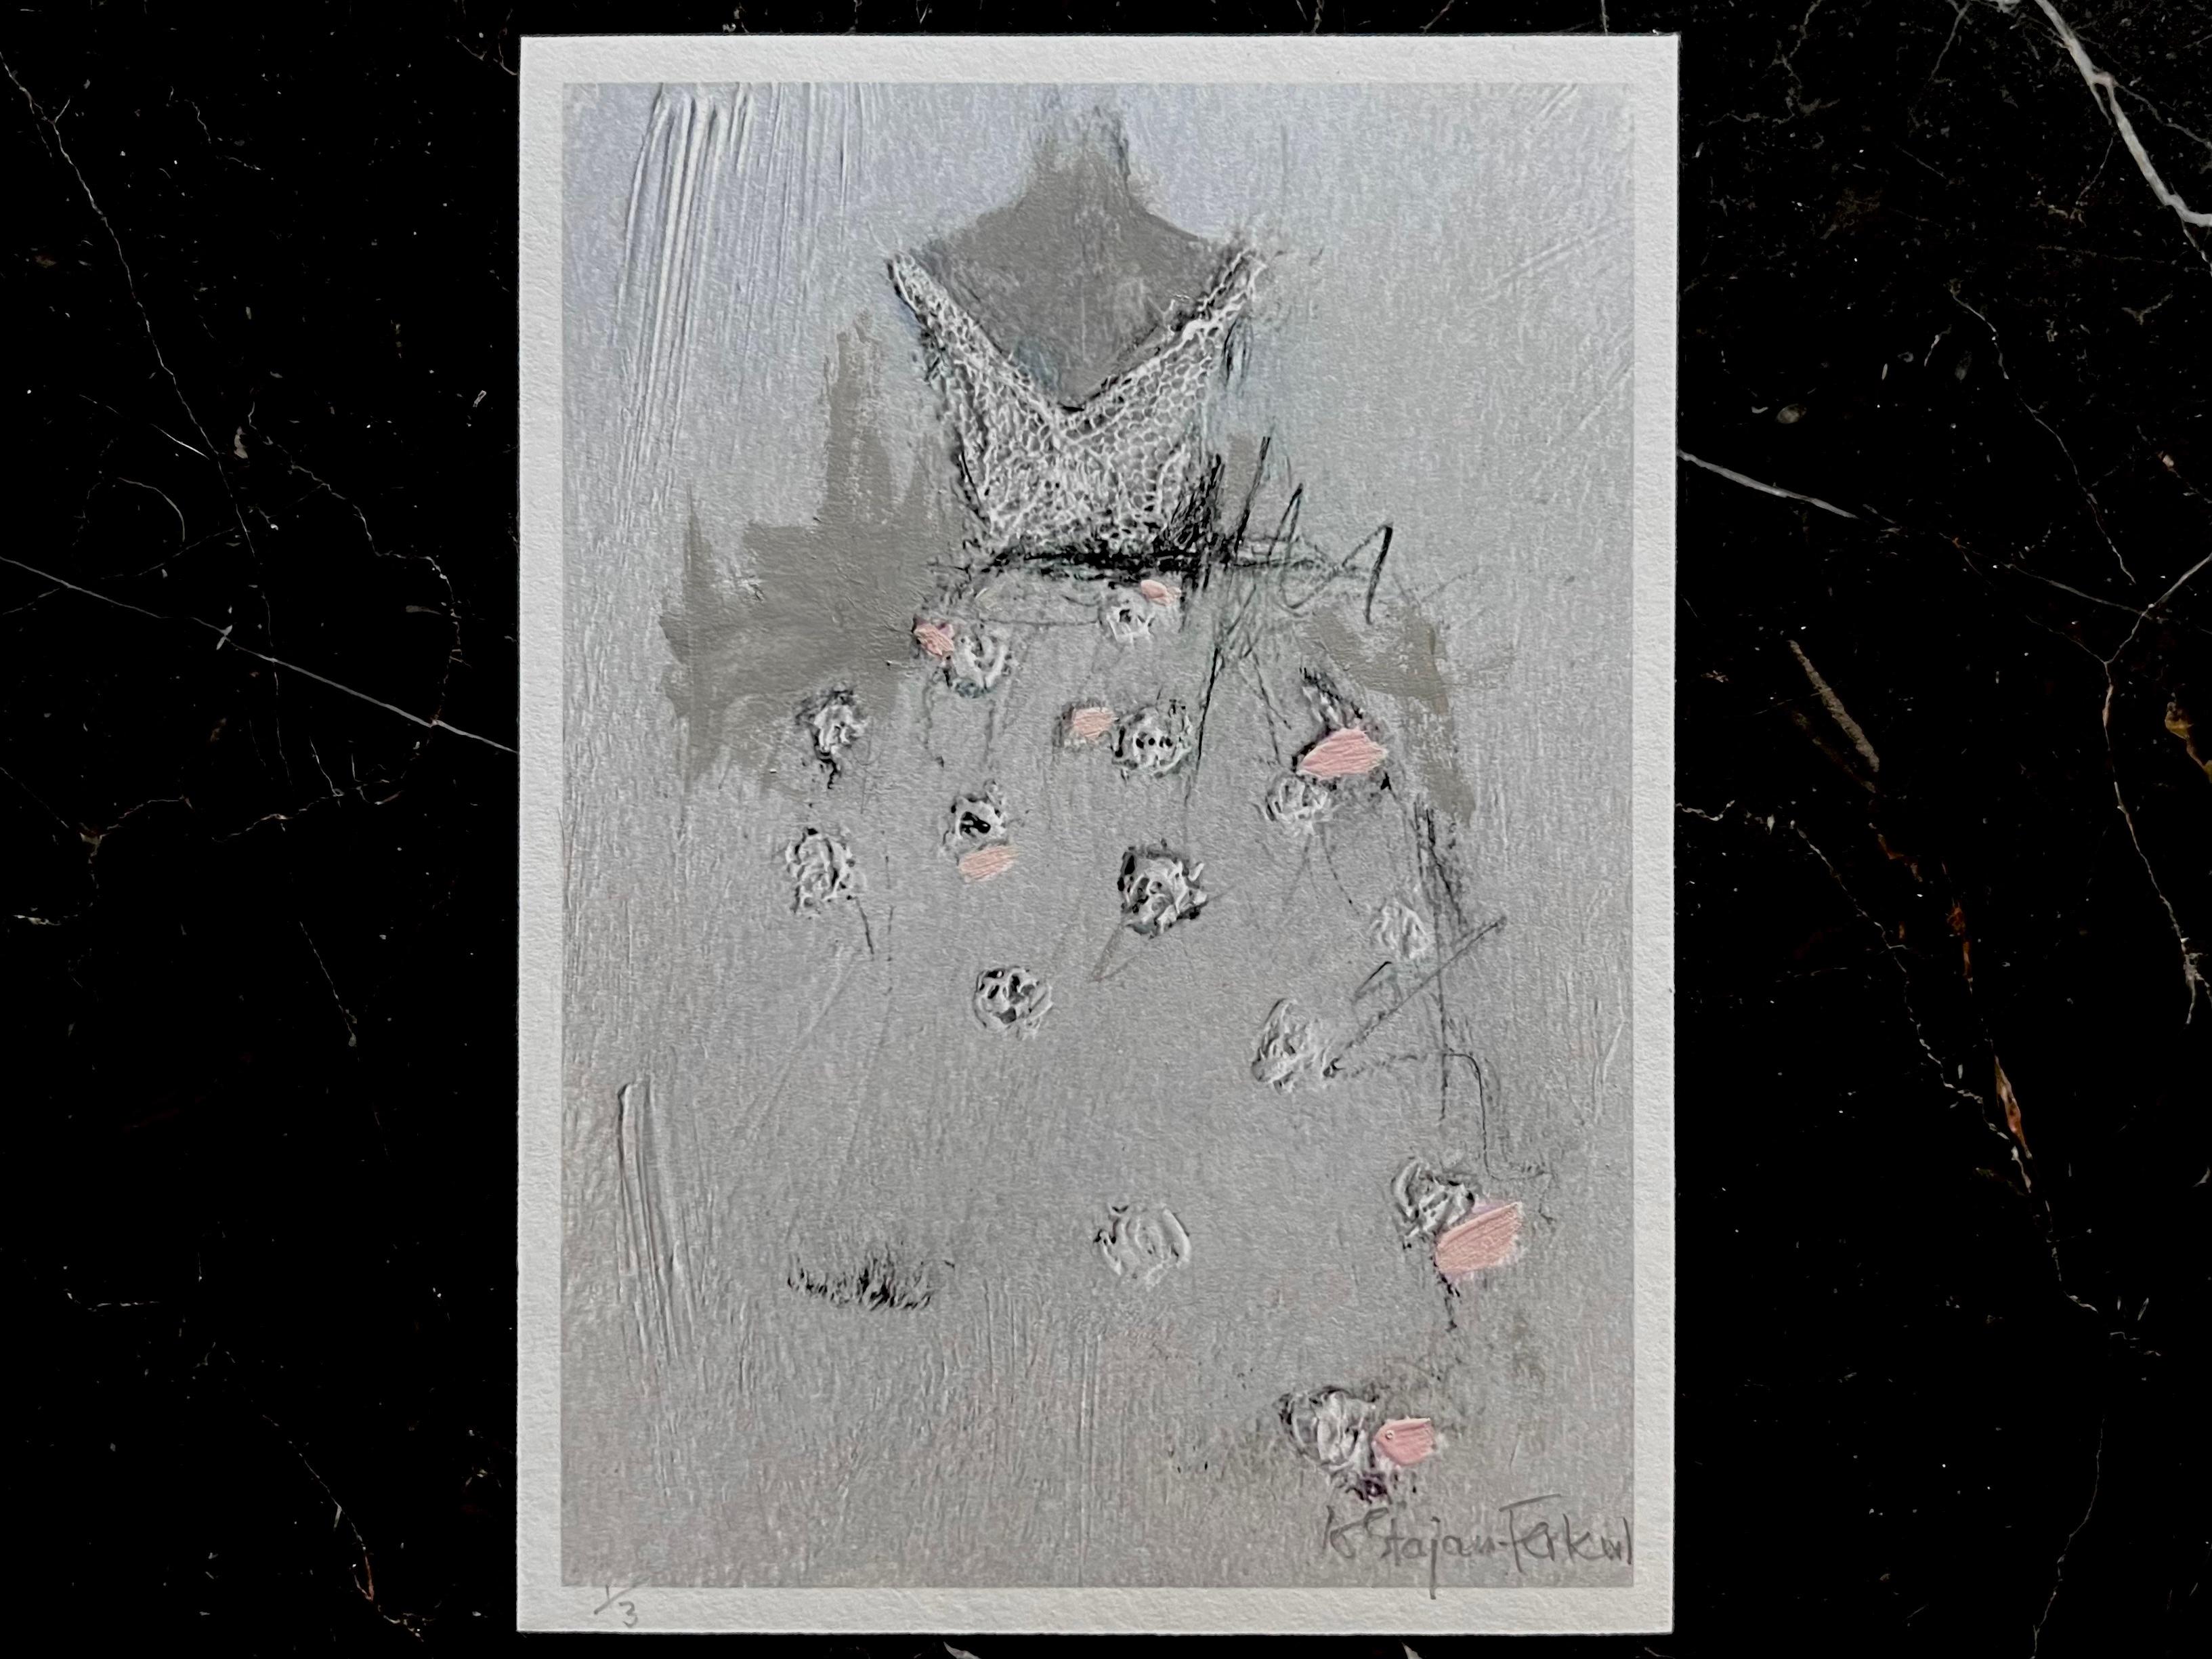 A delicate dance of grey and pink. This one-of-a-kind Giclée print is a high-quality reproduction of an original artwork printed on archival paper. Hand painted strokes and embellishments are added to give a unique quality to the print. The fusion